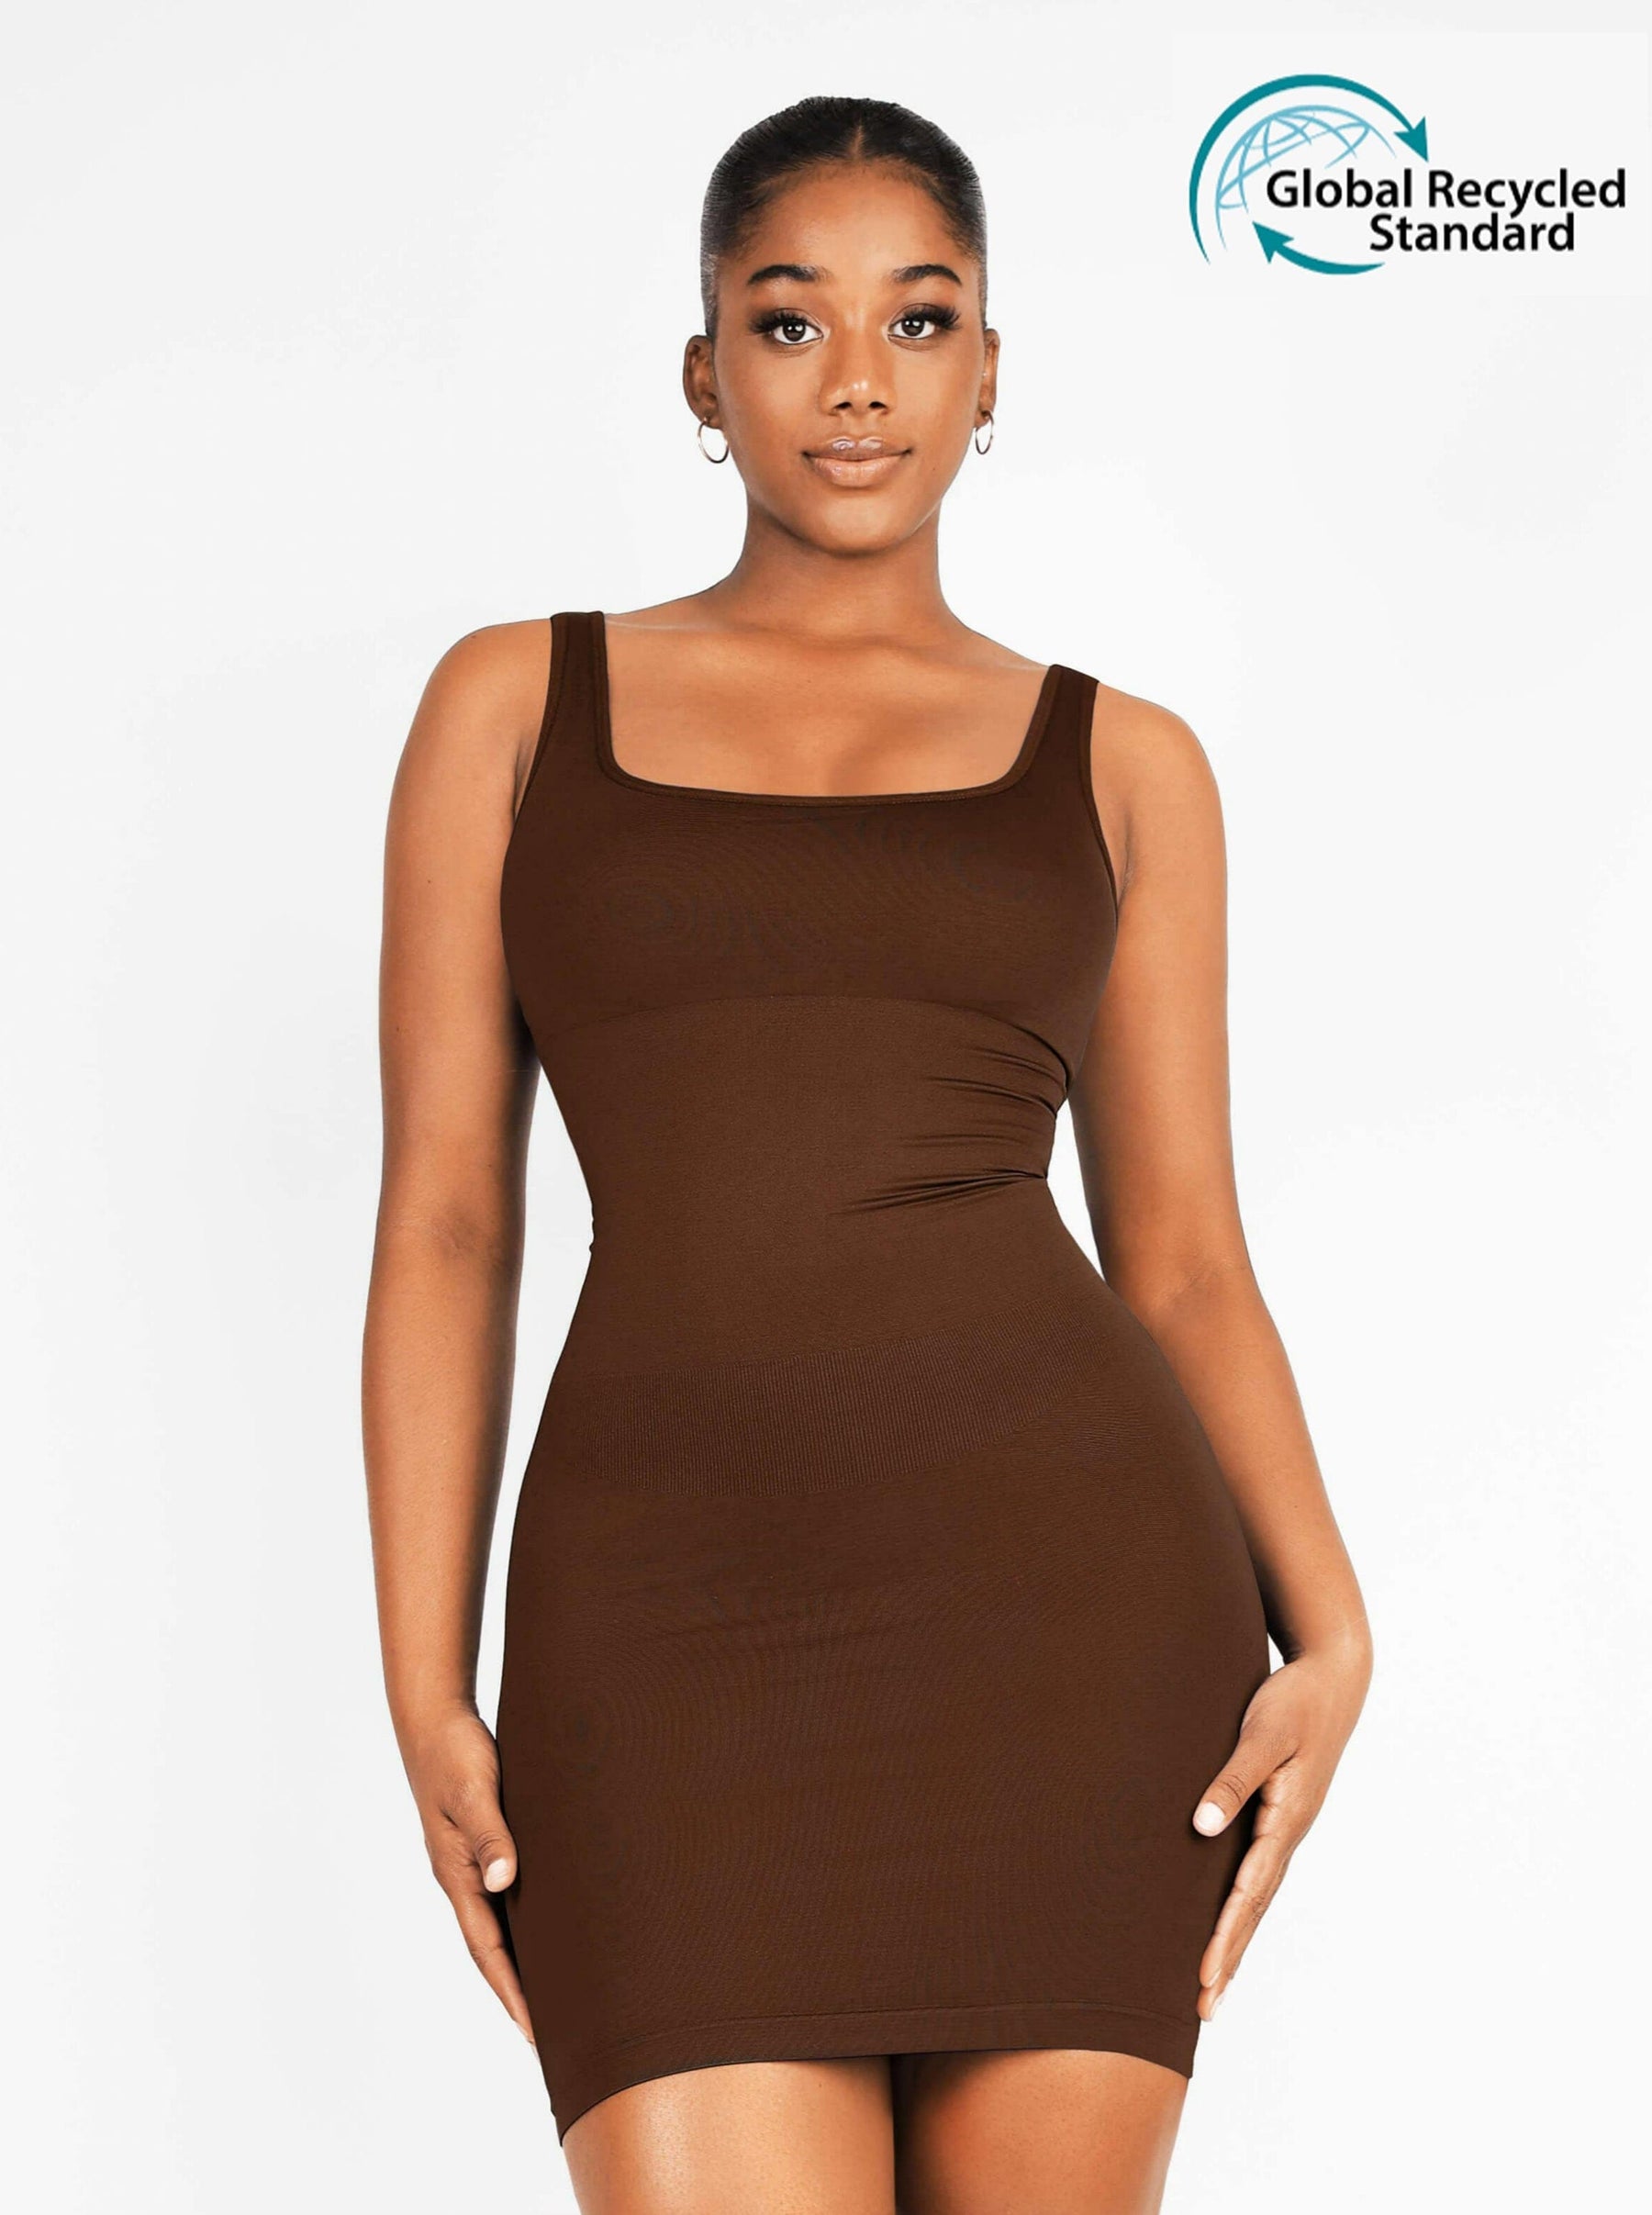 Wholesale Eco-friendly Square-neck Shaper Snatched Seamless Dress